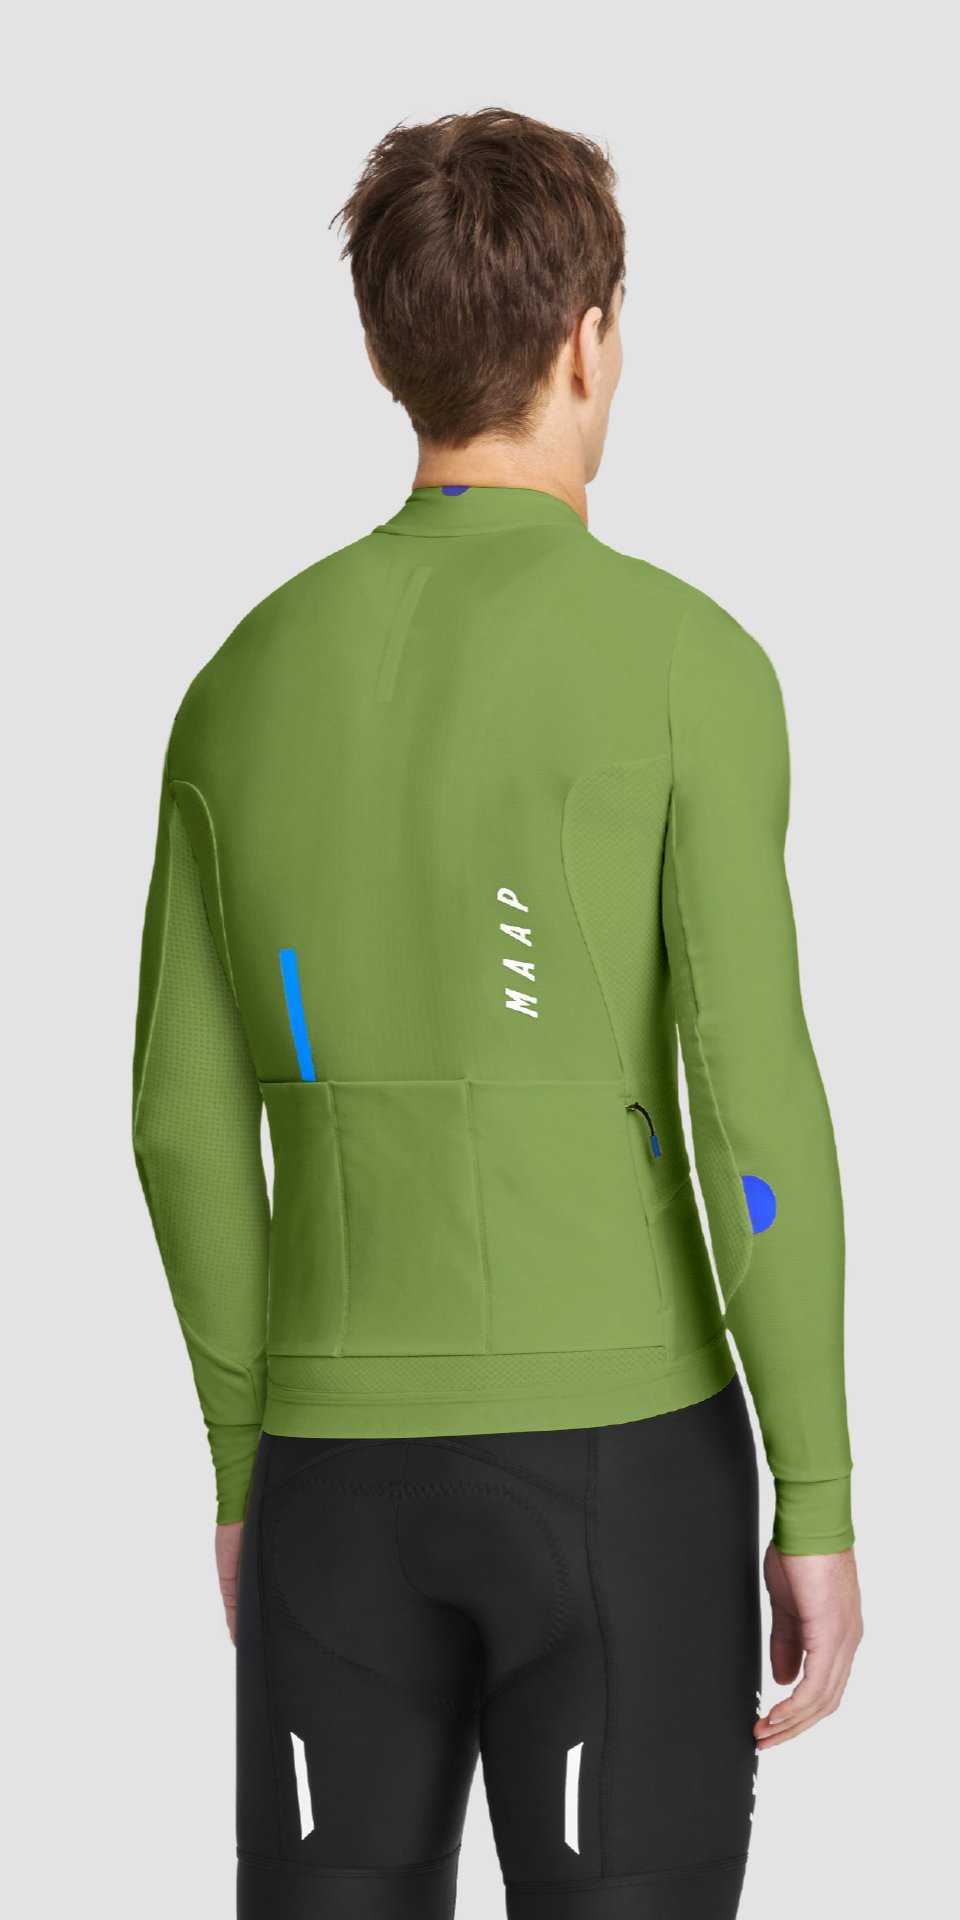 Force Pro Winter LS Jersey - MAAP Cycling Apparel